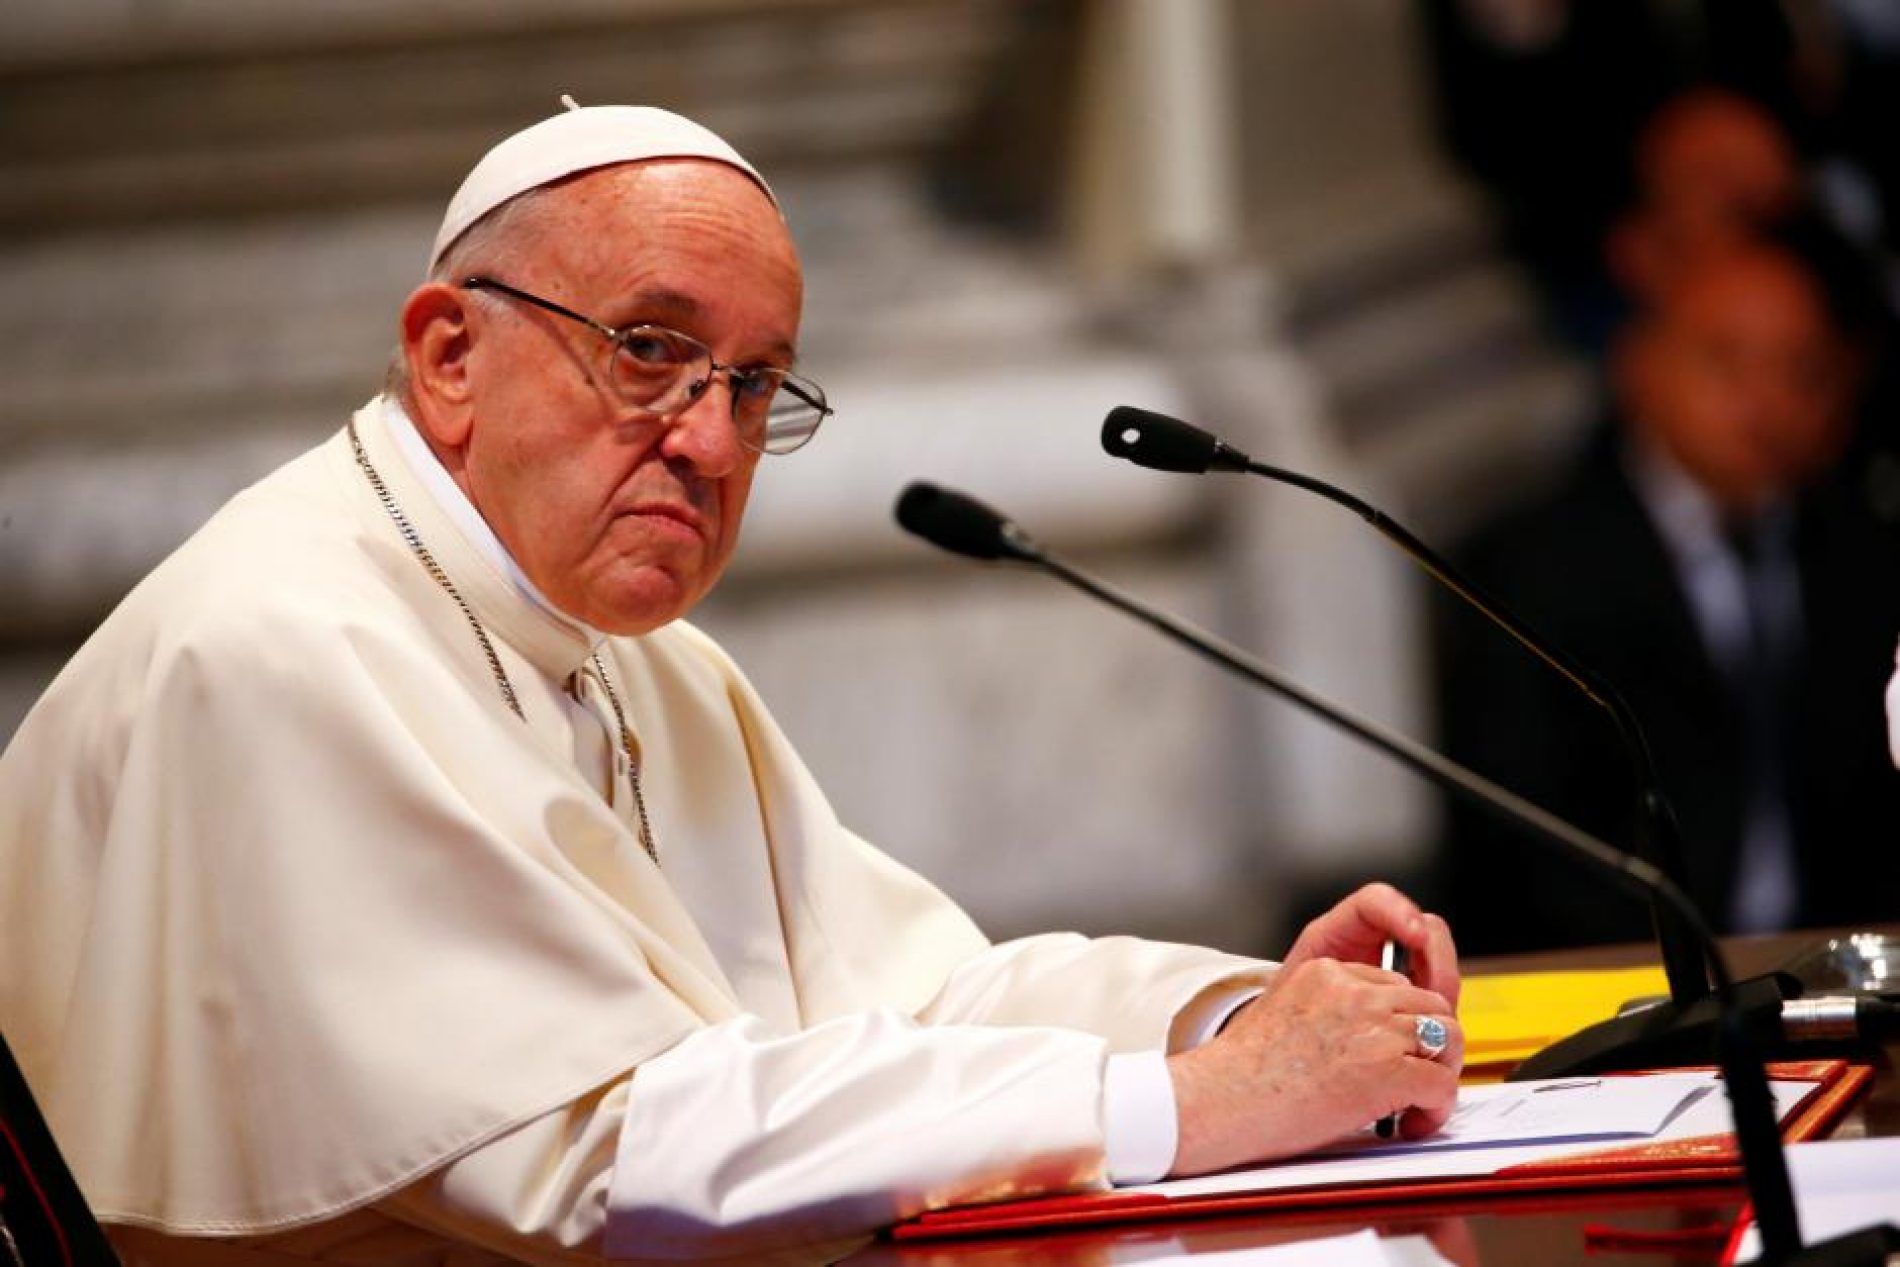 Do Not Applaud The Pope’s Stance On Homosexuality